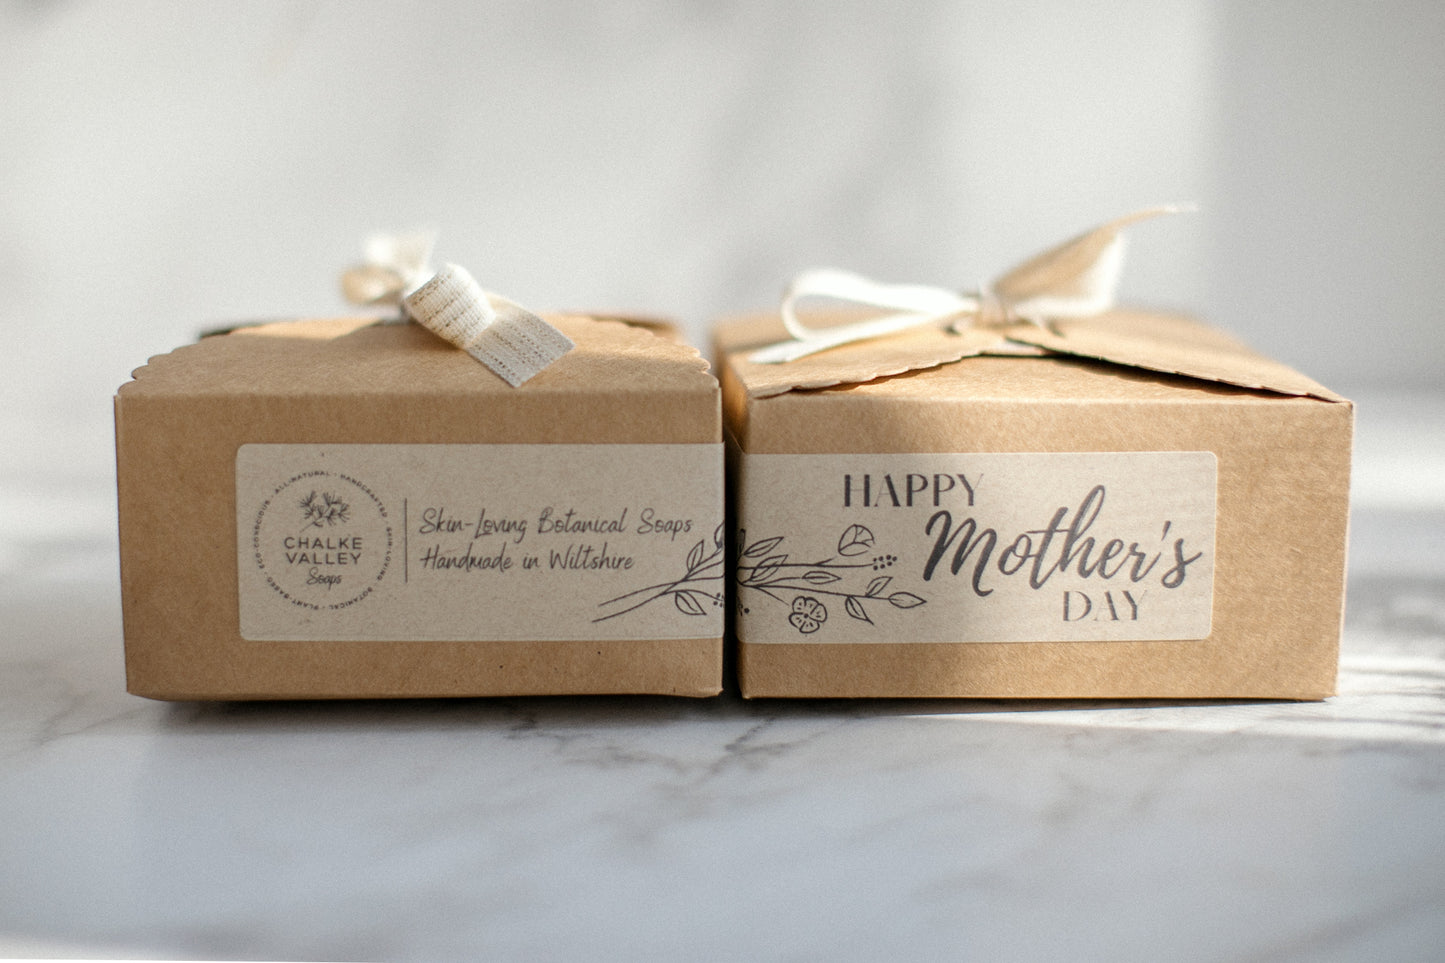 “Anya” Gift Box for Mother's Day